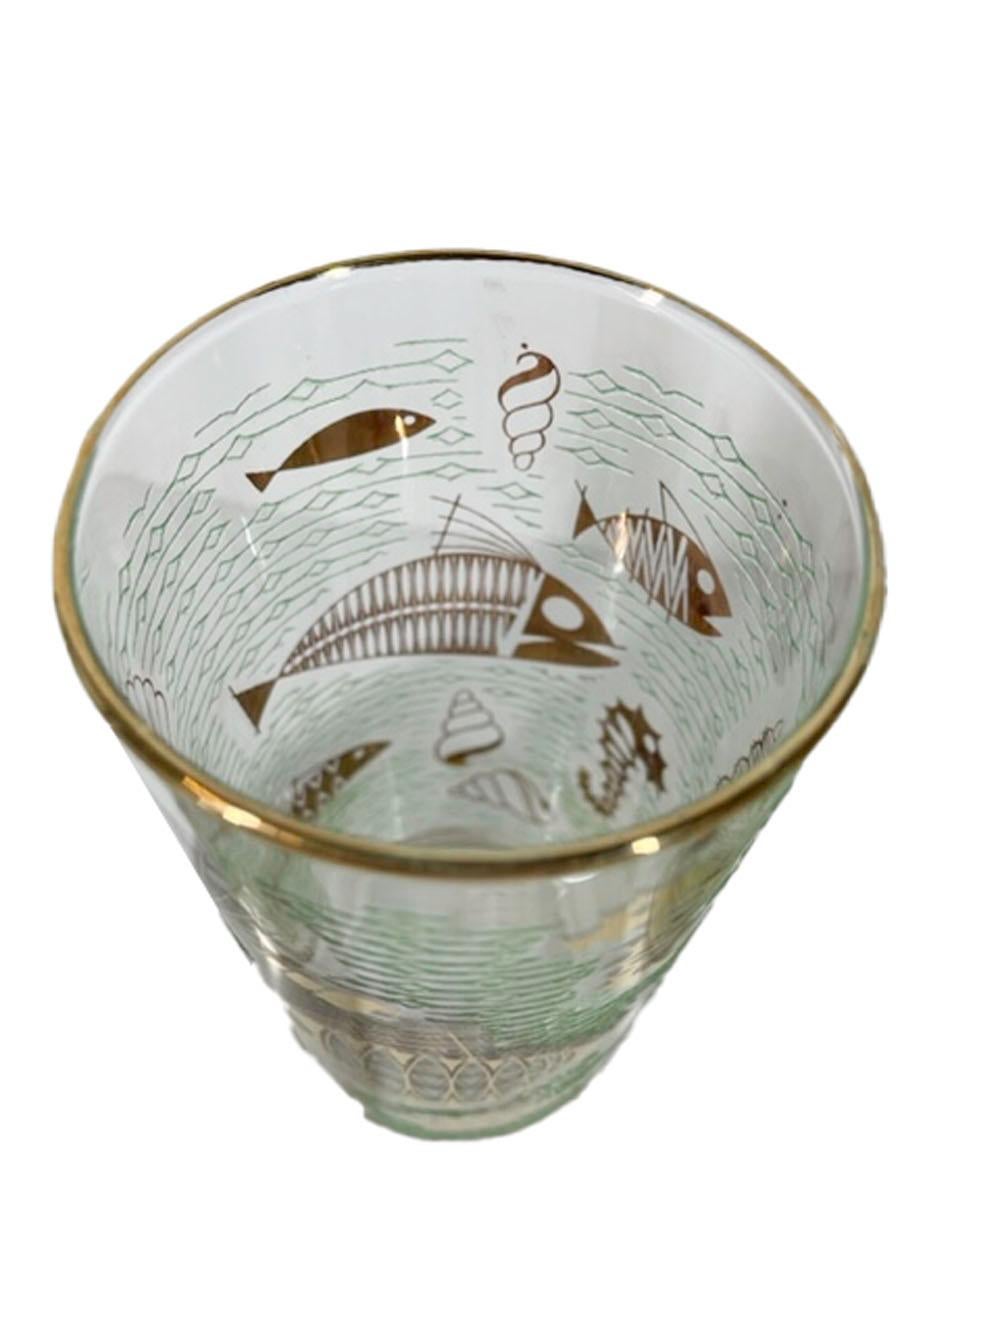 Six mid-century modern highball glasses by Libbey Glass in the Marine Life pattern with 22k gold stylized fish and other marine animals against a ground of raised translucent green enamel waves.